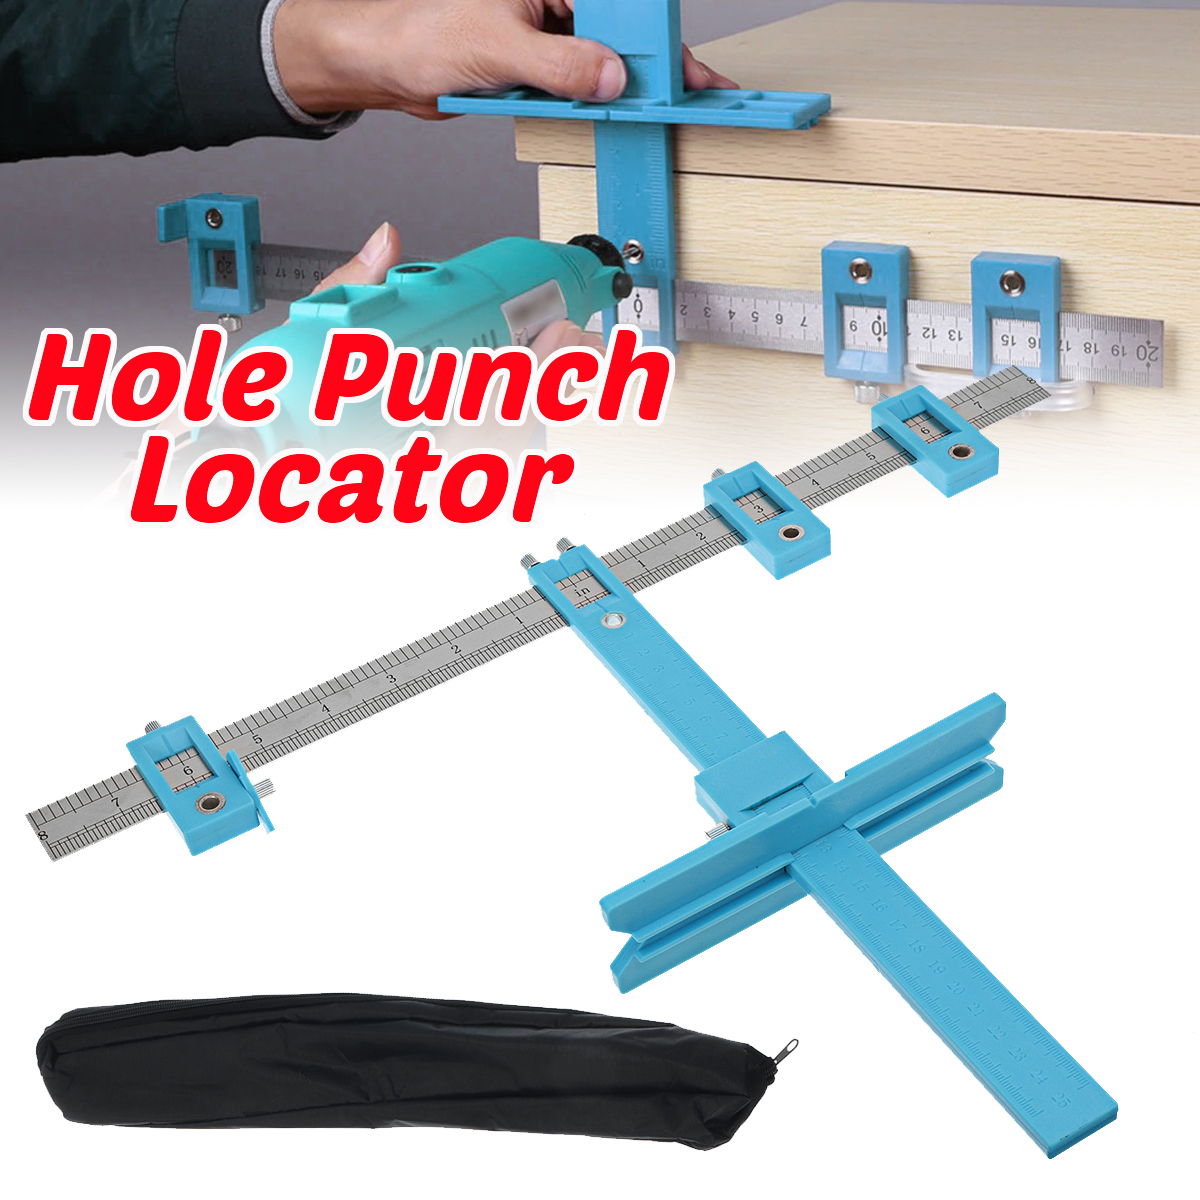 Hole-Punch-Locator-Jig-Tool-Drill-Guide-Drawer-Cabinet-Hardware-Dowel-Woodworking-Ruler-1712431-1